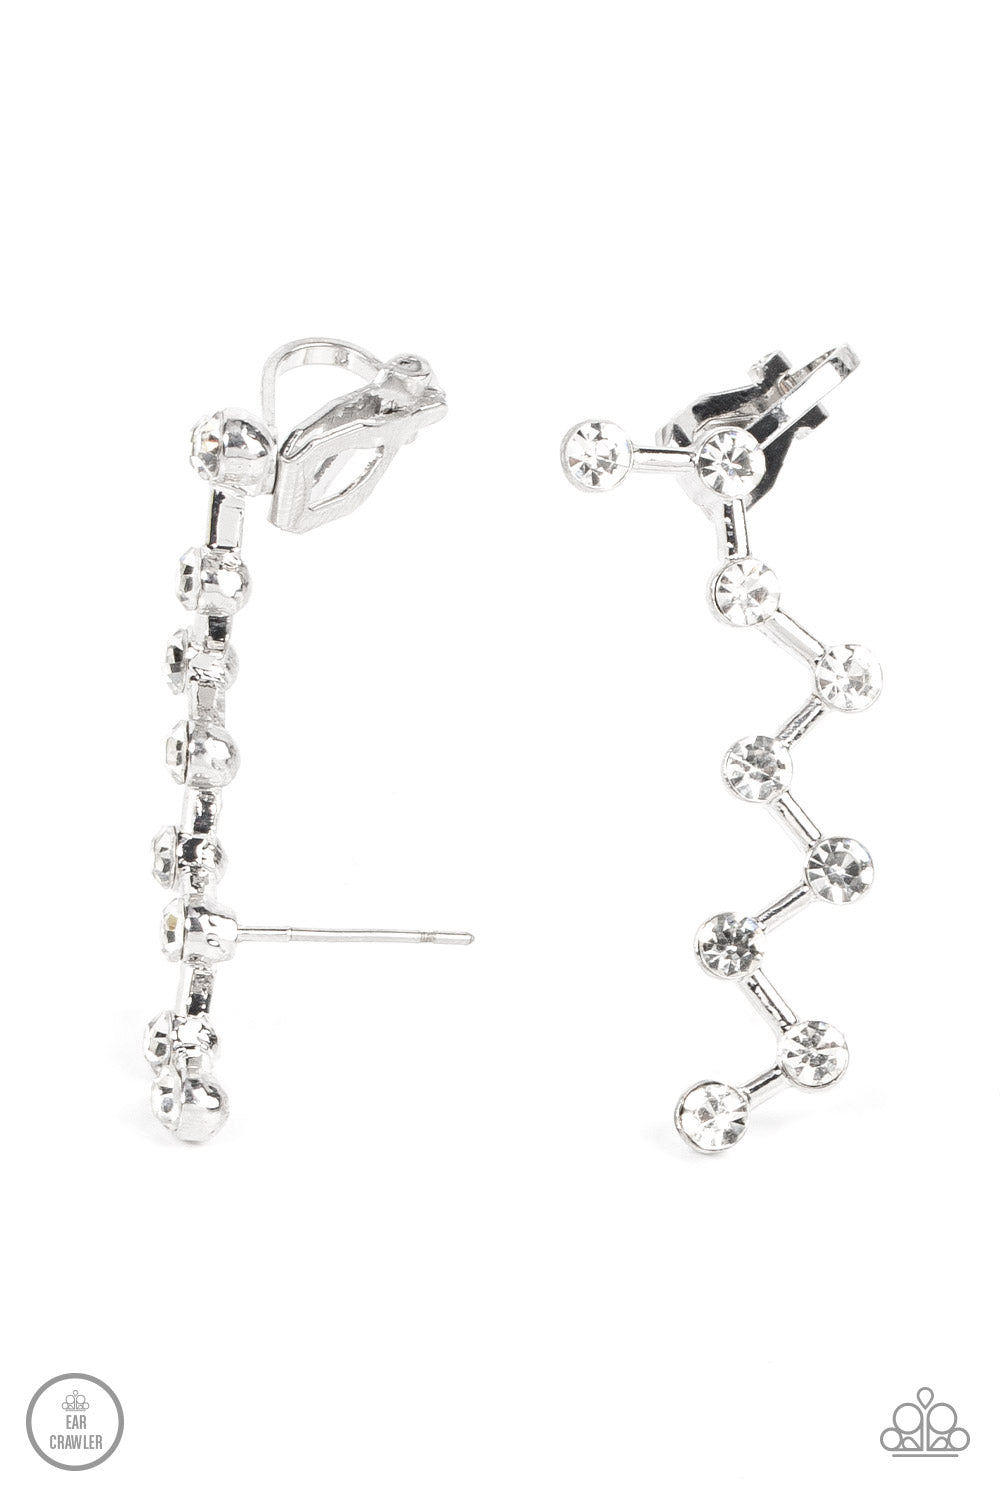 Clamoring Constellations Paparazzi Accessories Earrings  White